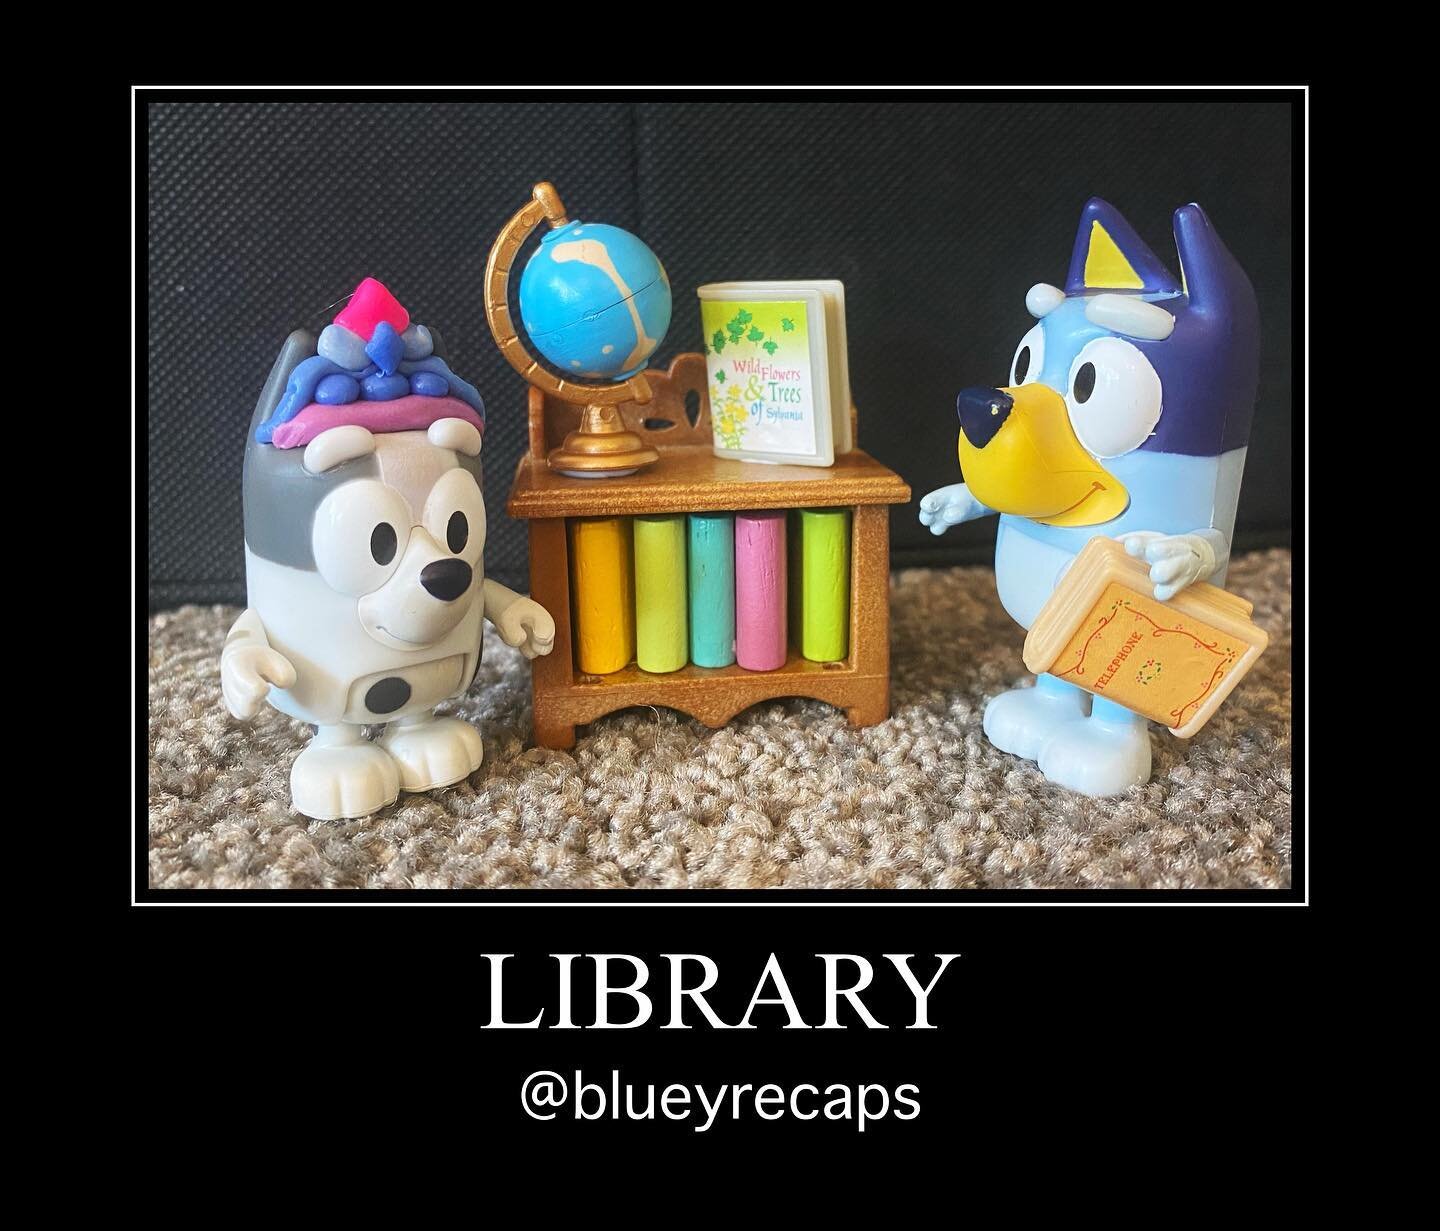 Bluey Recap: Library (#2.38)
#bestbits: the Cat Squad bike &ldquo;here for your purrrrr-tection&rdquo;
#lifelesson: SSSHHHHHHHHH, and kids (unfortunately) learn from everything you do
.
Uncle Stripe and Muffin are in the car when Stripe goes through 